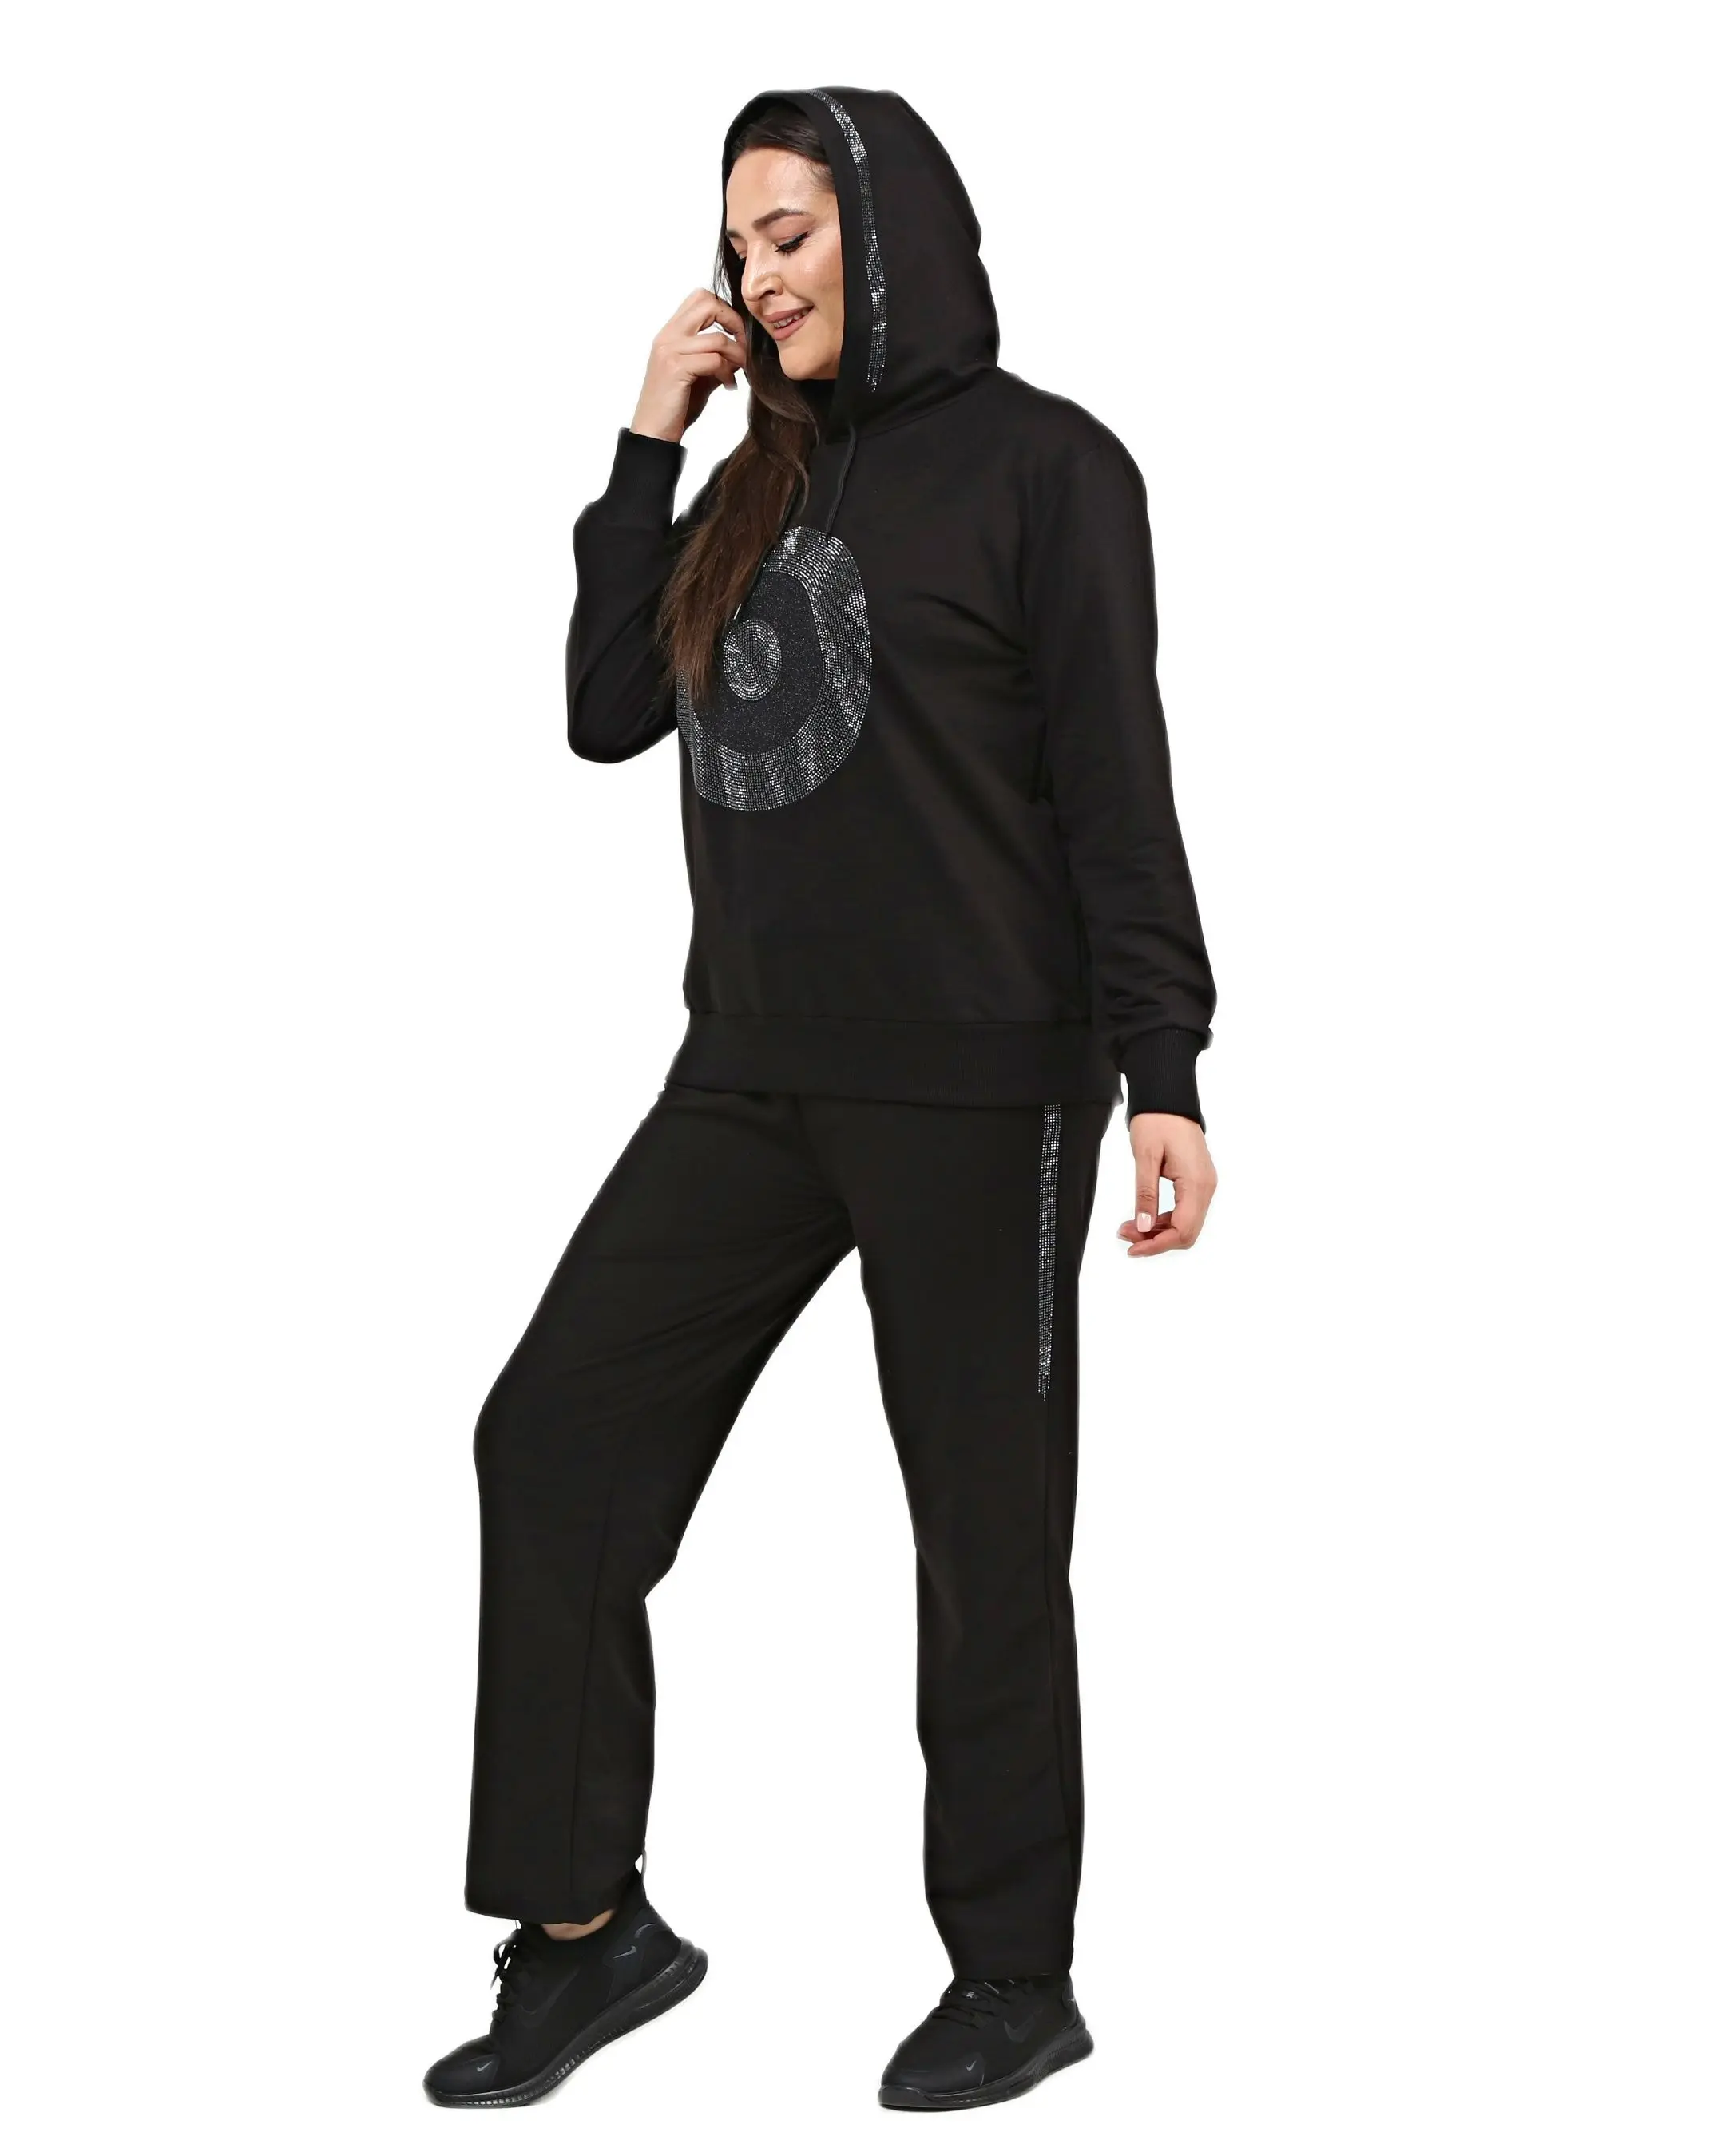 Women’s Plus Size Black Sweatsuit Set 2 Piece Circle Stone Print Tracksuit, Designed and Made in Turkey, New Arrival